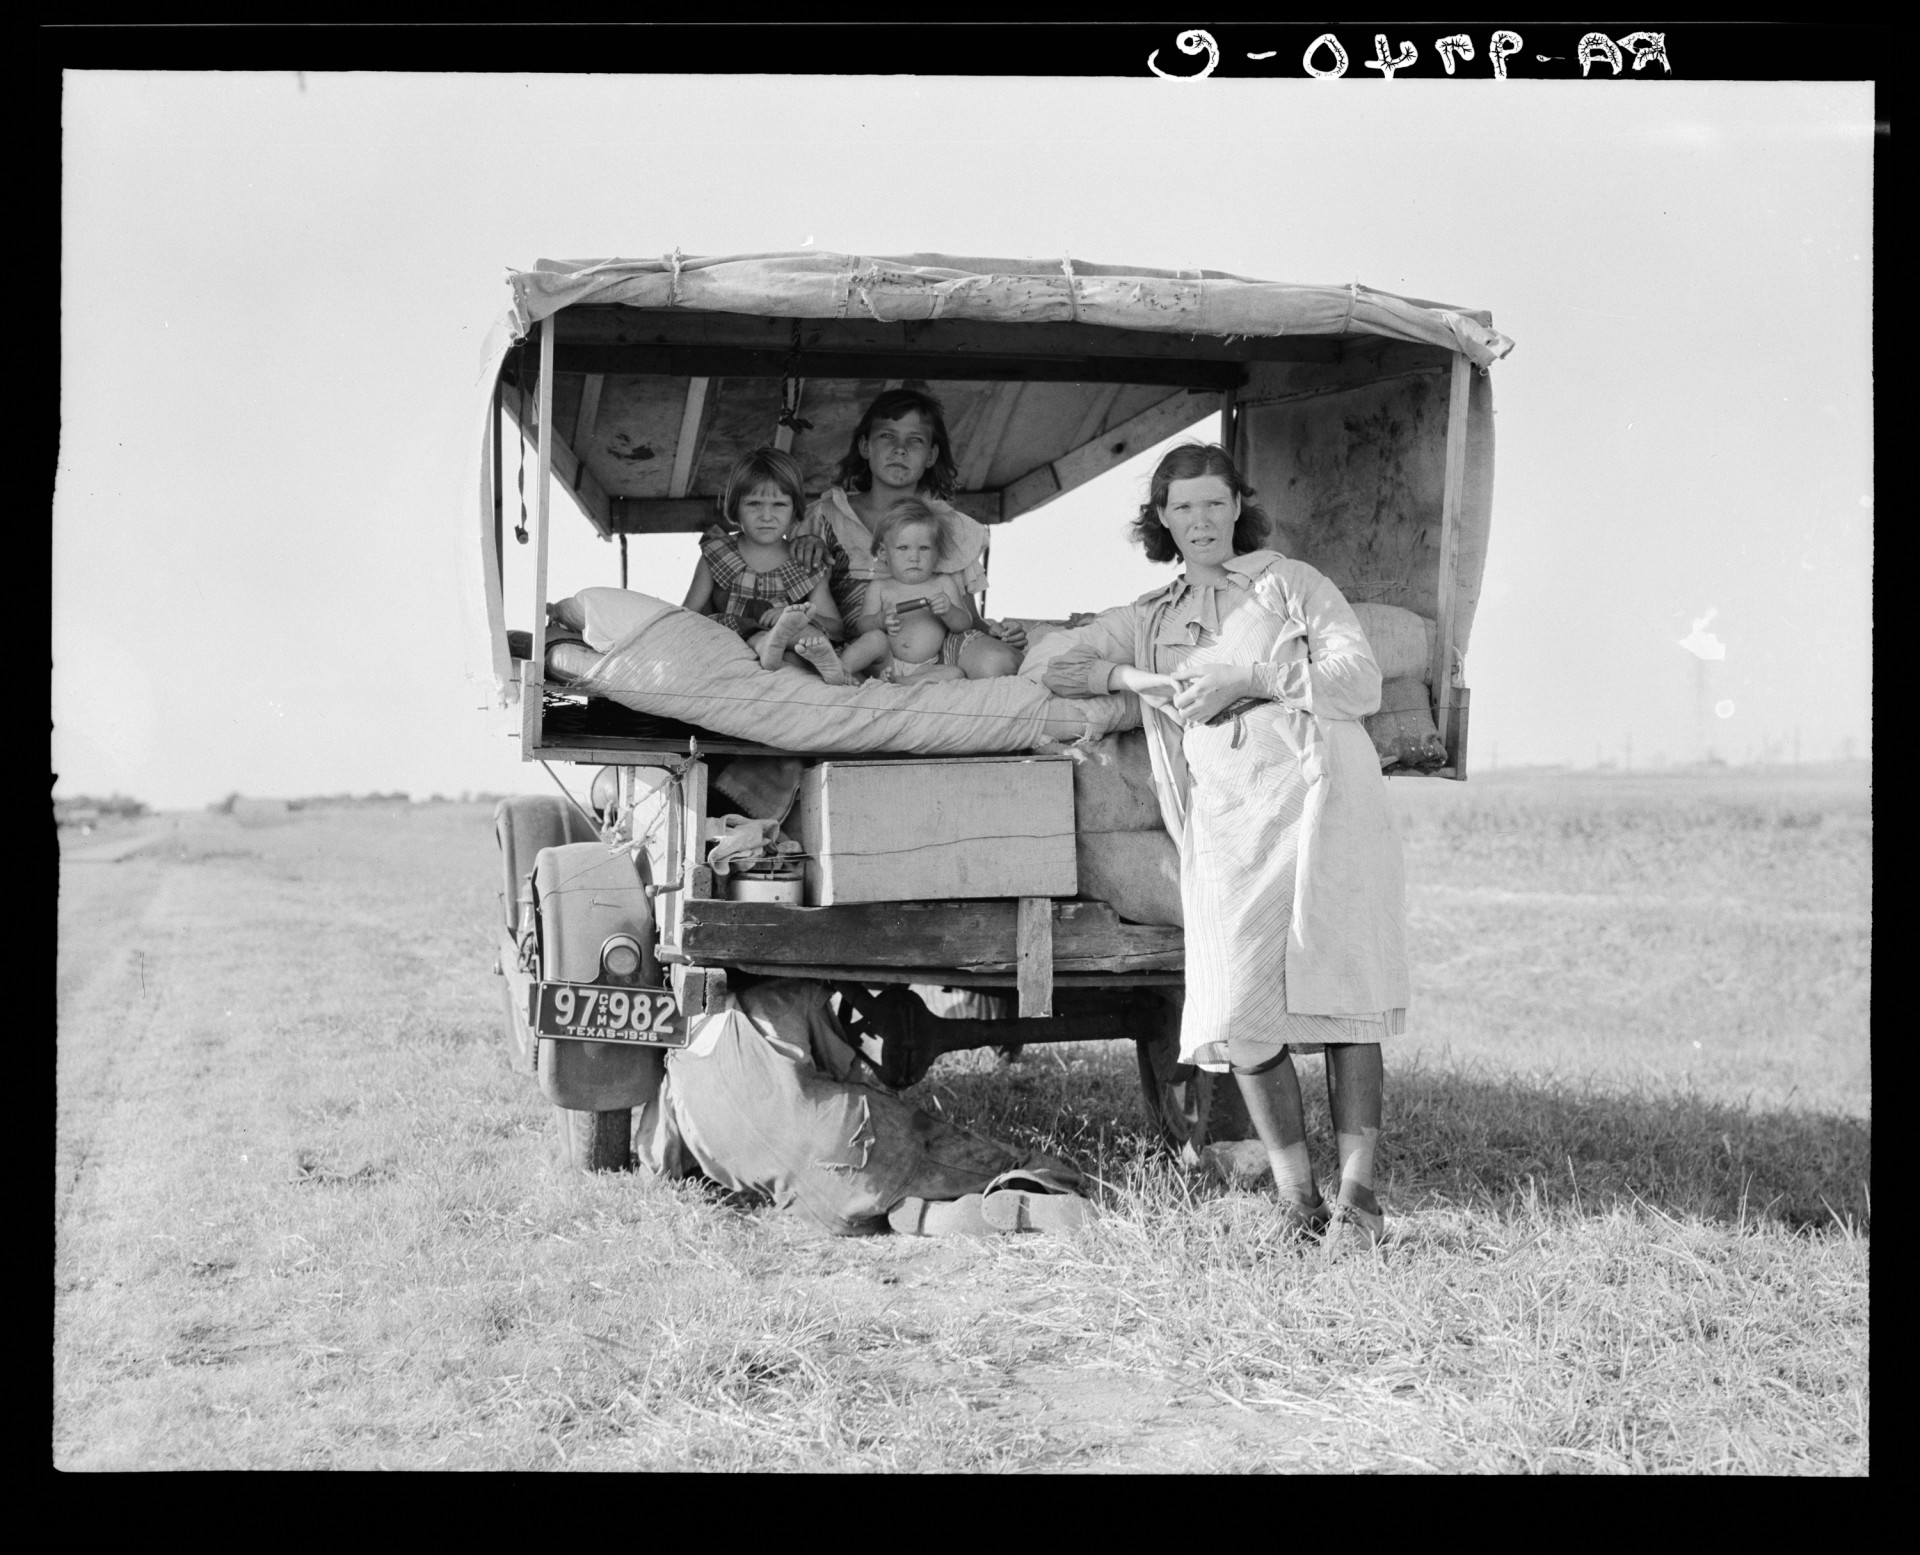 A family traveling between Dallas and Austin, Texas. "The people have left their home and connections in South Texas, and hope to reach the Arkansas Delta for work in the cotton fields," Lang wrote in her notes. "Penniless people. No food and three gallons of gas in the tank. The father is trying to repair a tire. Three children. Father says, 'It's tough but life's tough anyway you take it.' "